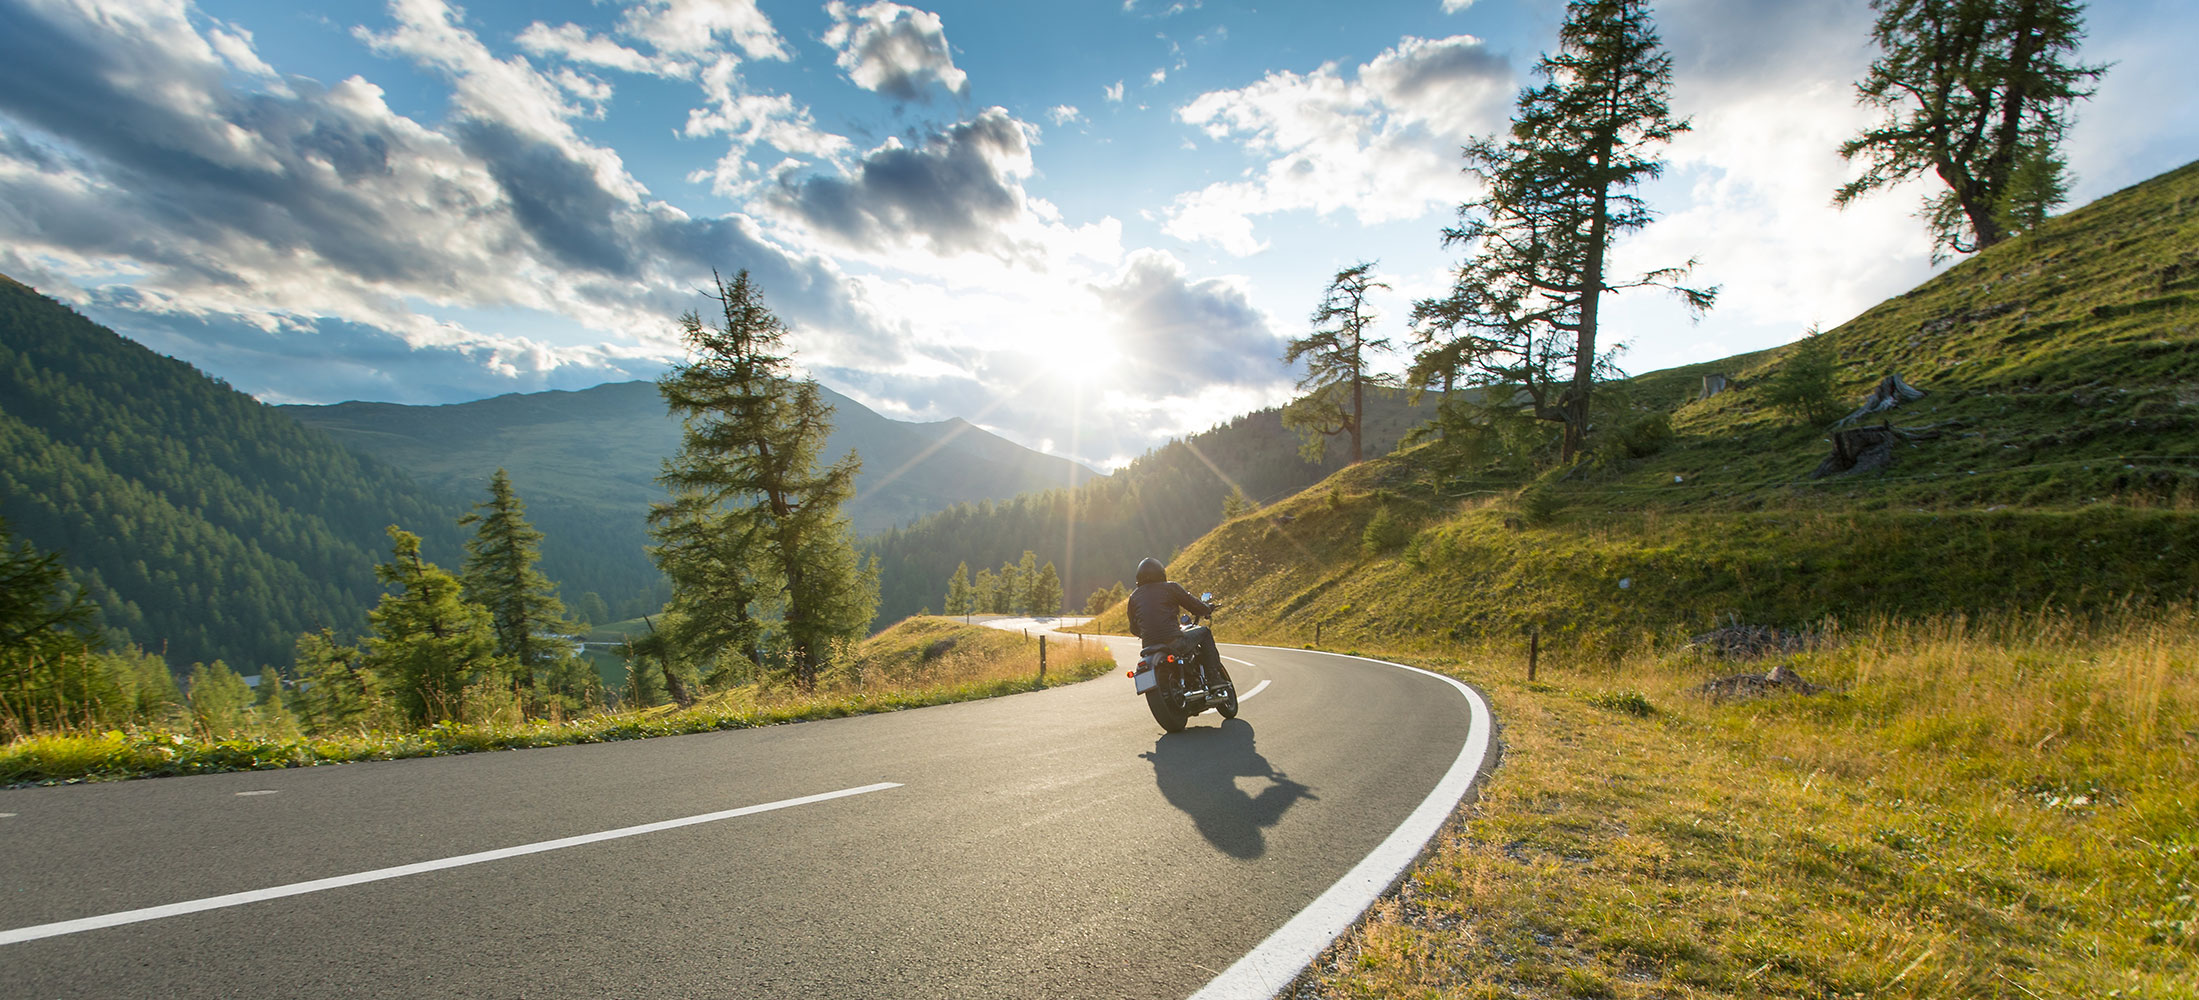 motorcycle insurance in bc